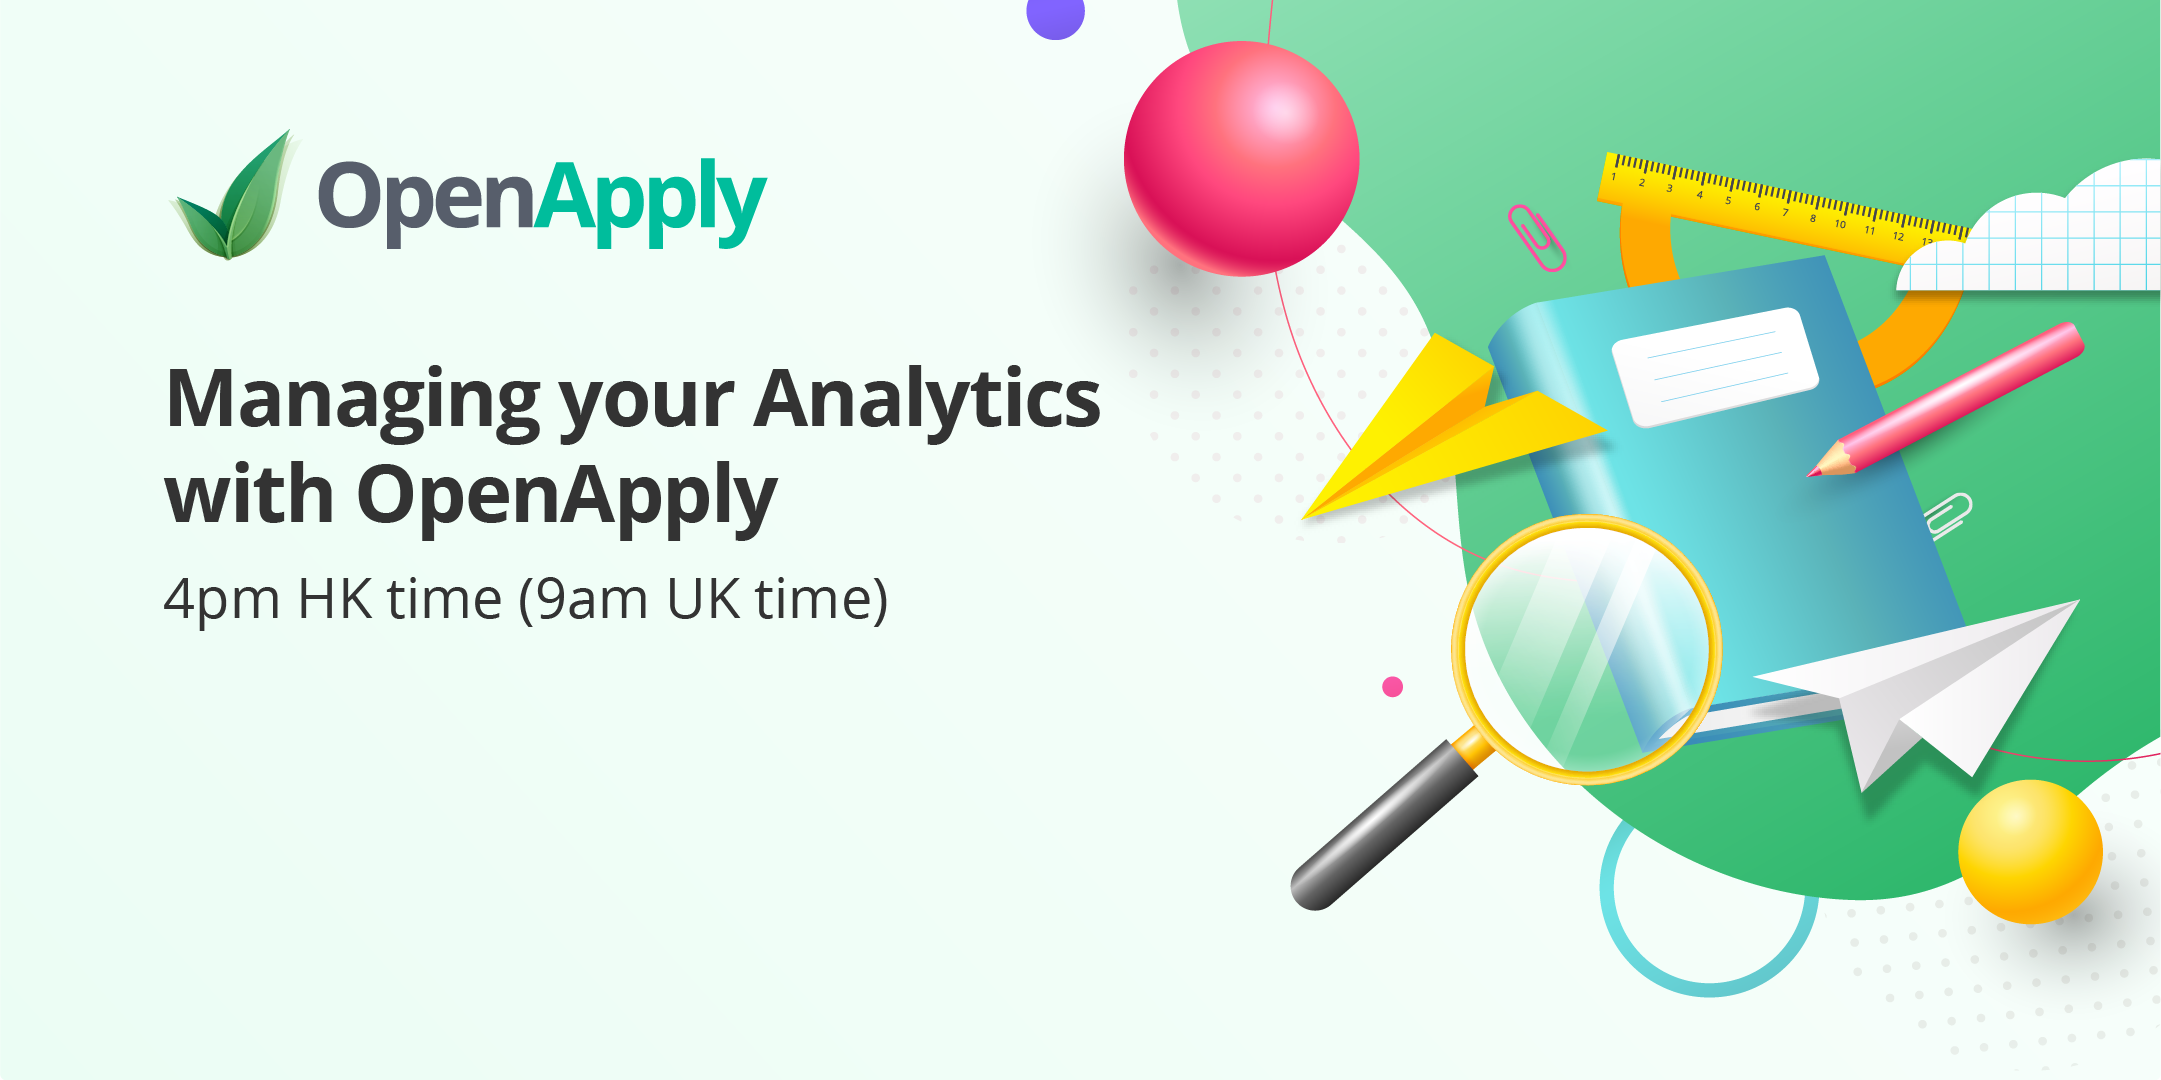 Managing your Analytics with OpenApply